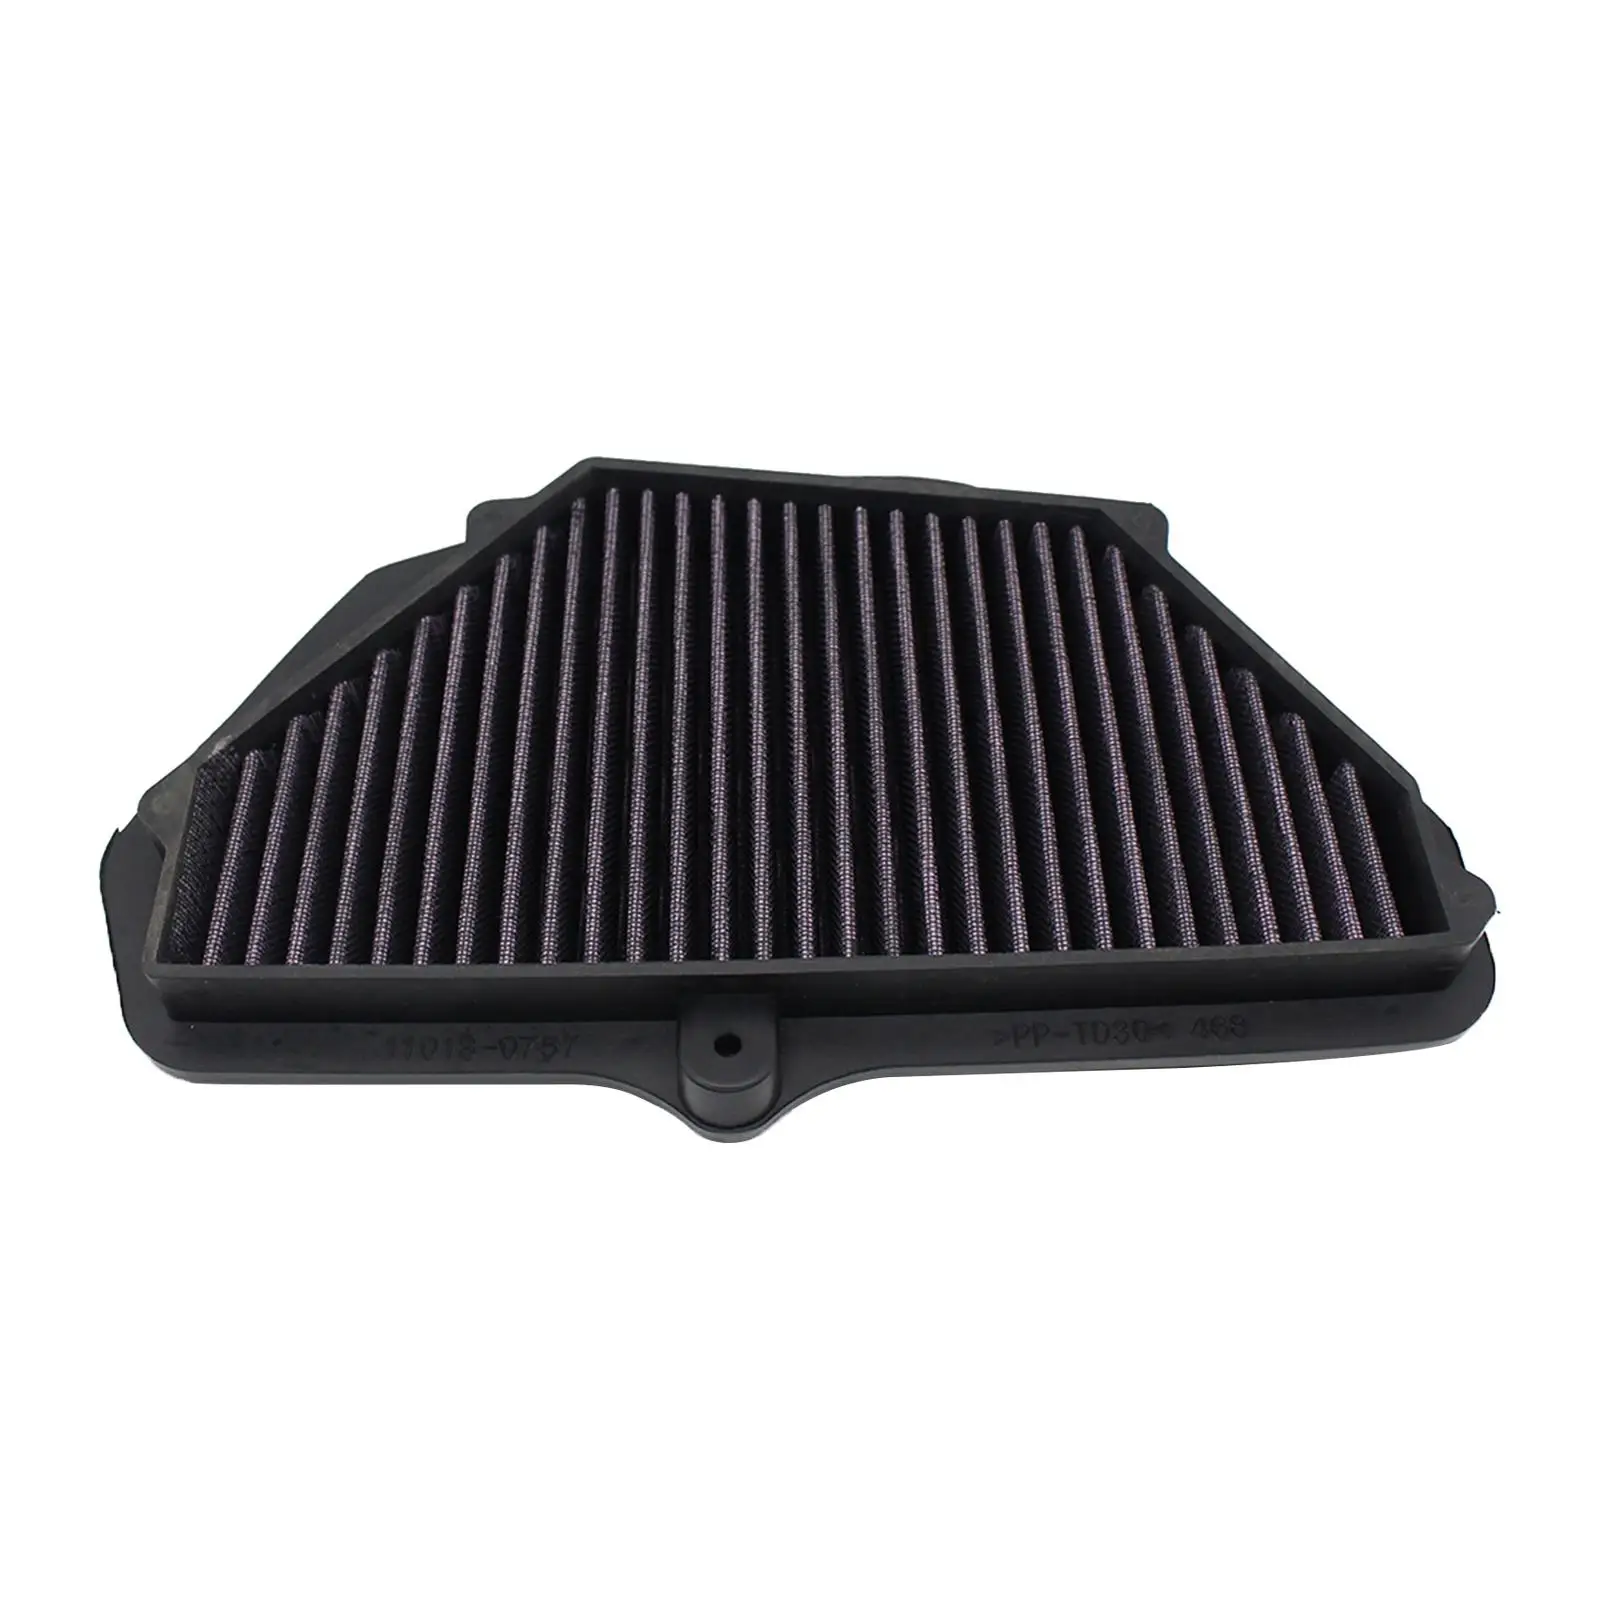 Motorcycle Air Filter Portable Replaces Air Filters for ZX10R